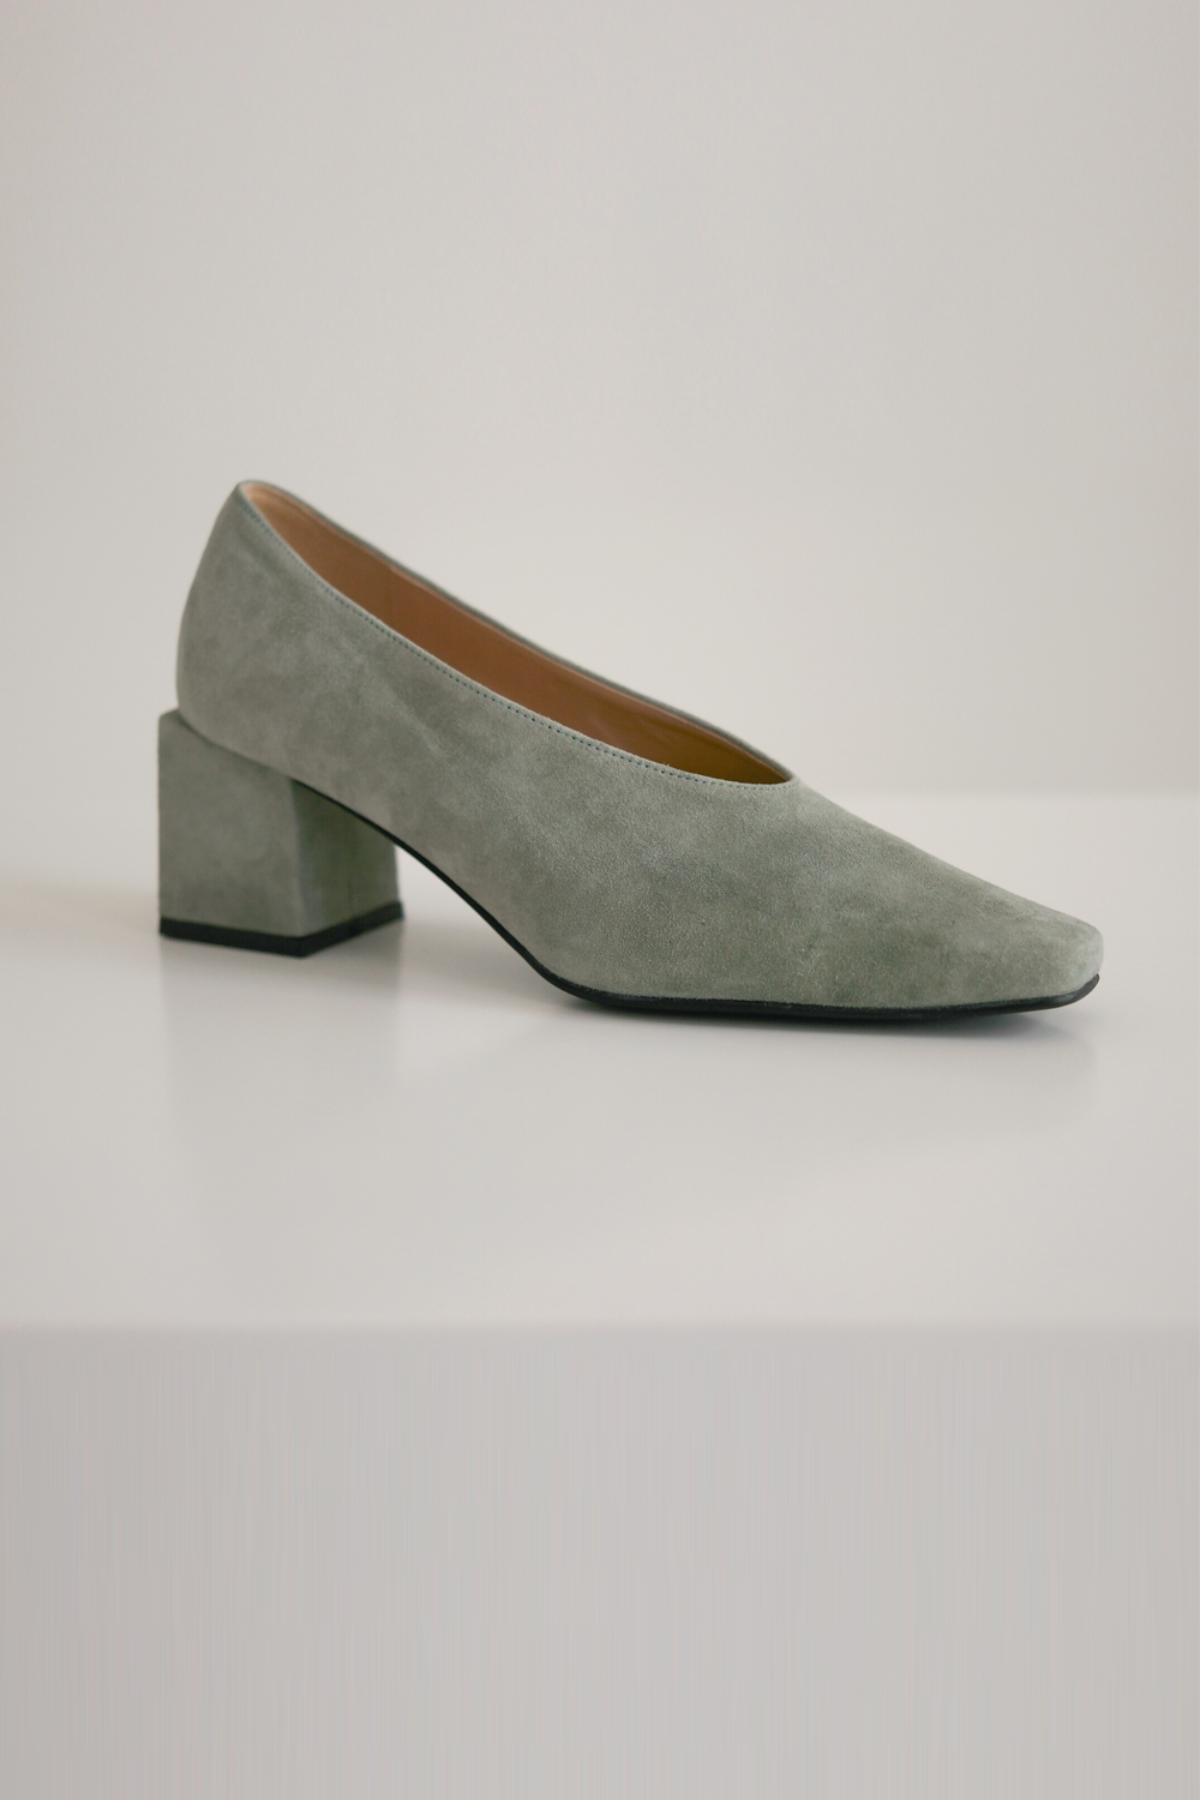 ANTHÈSE venica square middle heel, suede (mint)